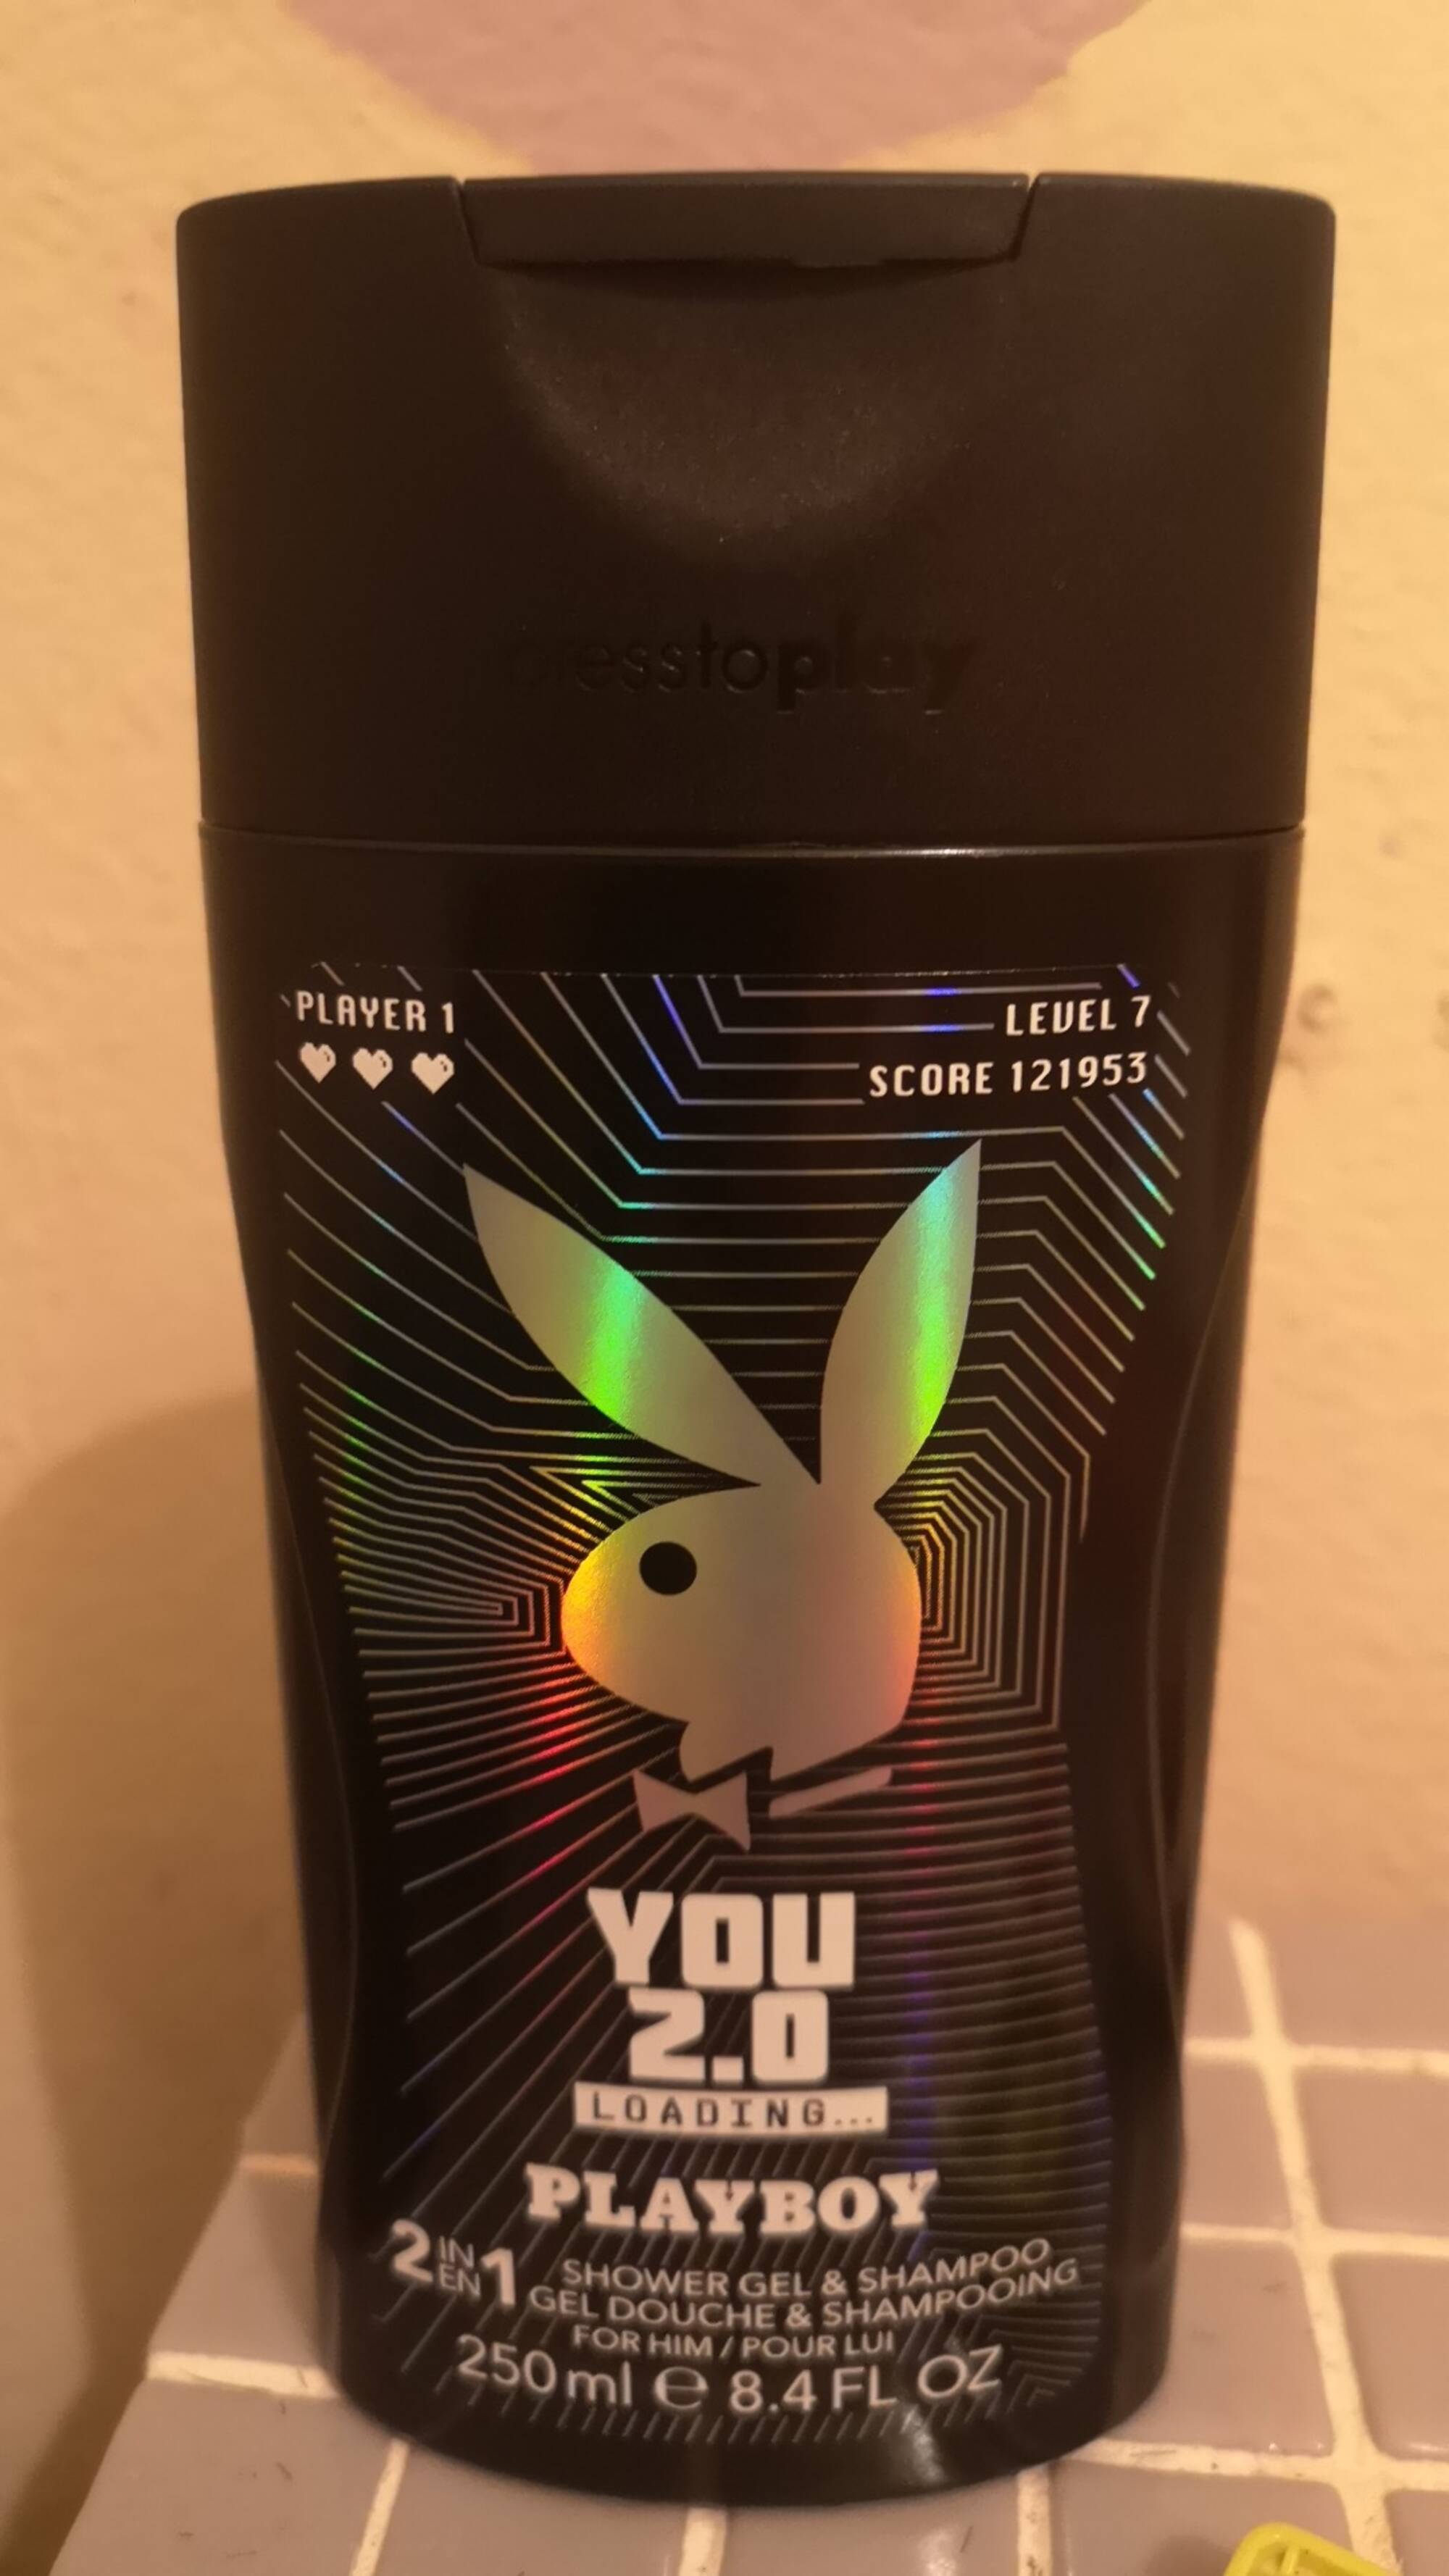 PLAYBOY - You 2.0 - Gel douche & shampooing